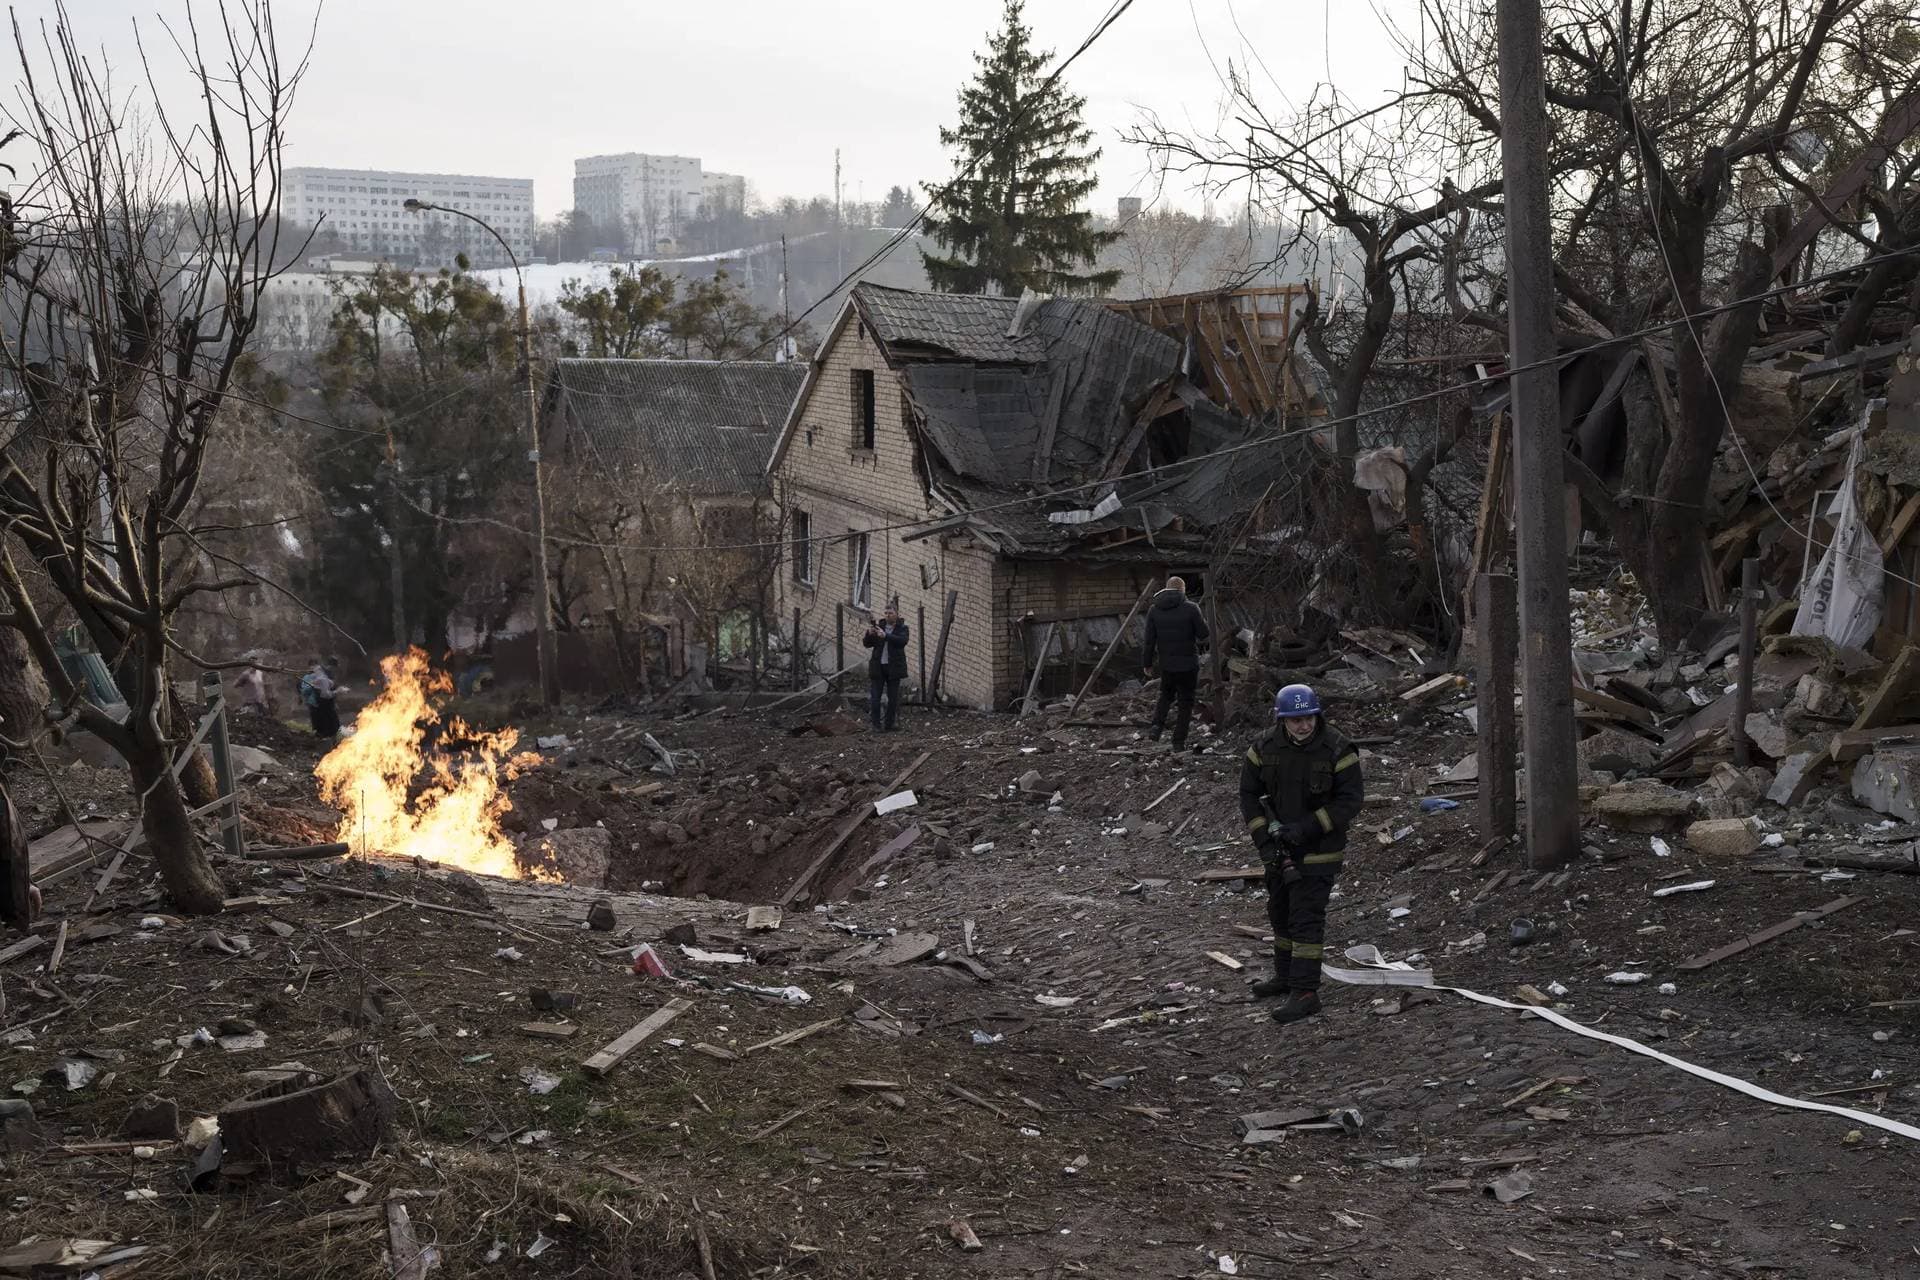 Emergency workers arrive at a residential area hit during a Russian attack in Kyiv